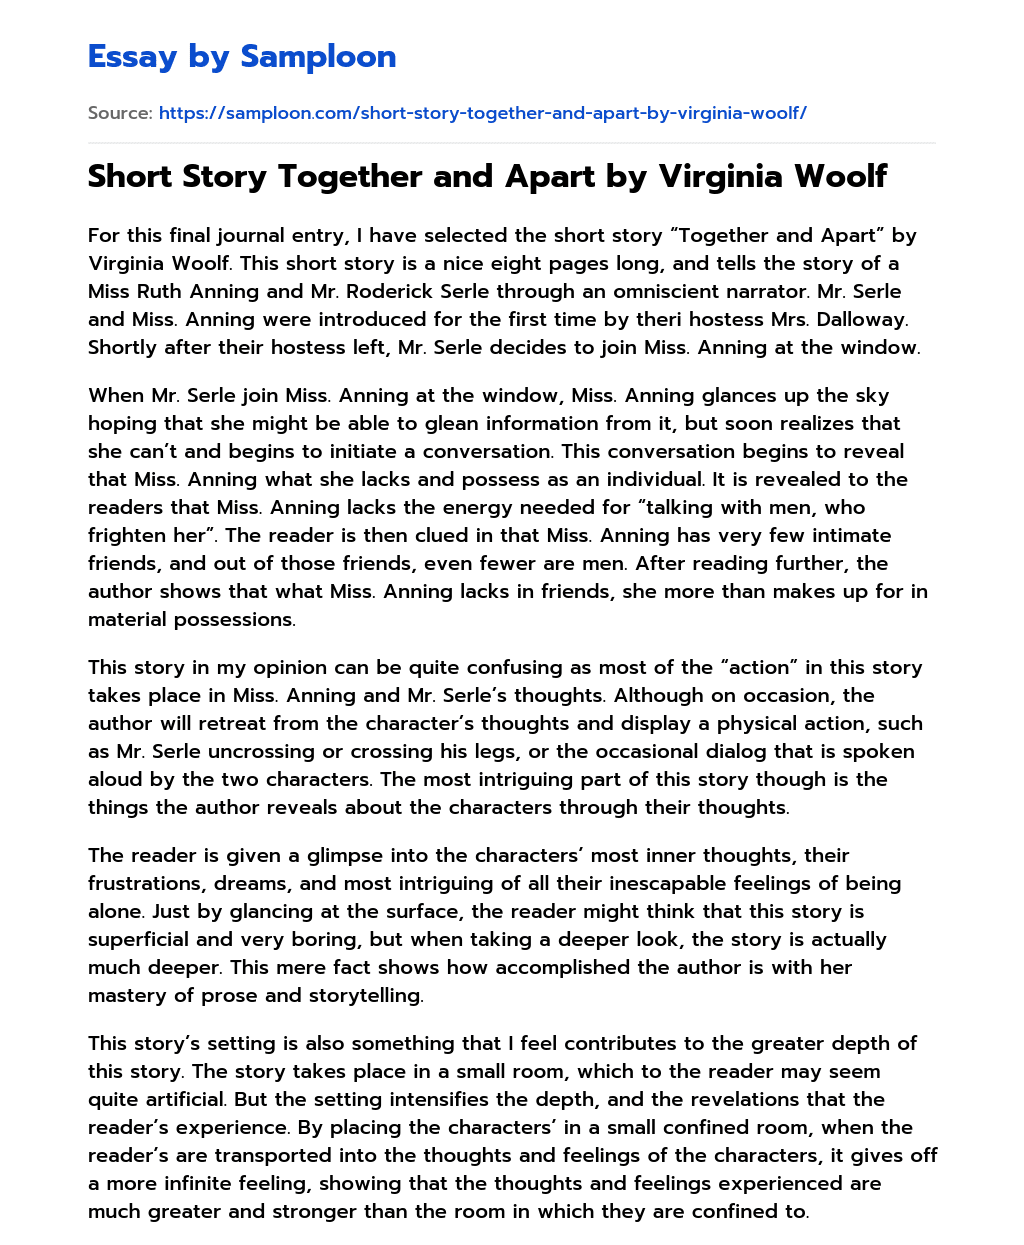 Short Story Together and Apart by Virginia Woolf essay